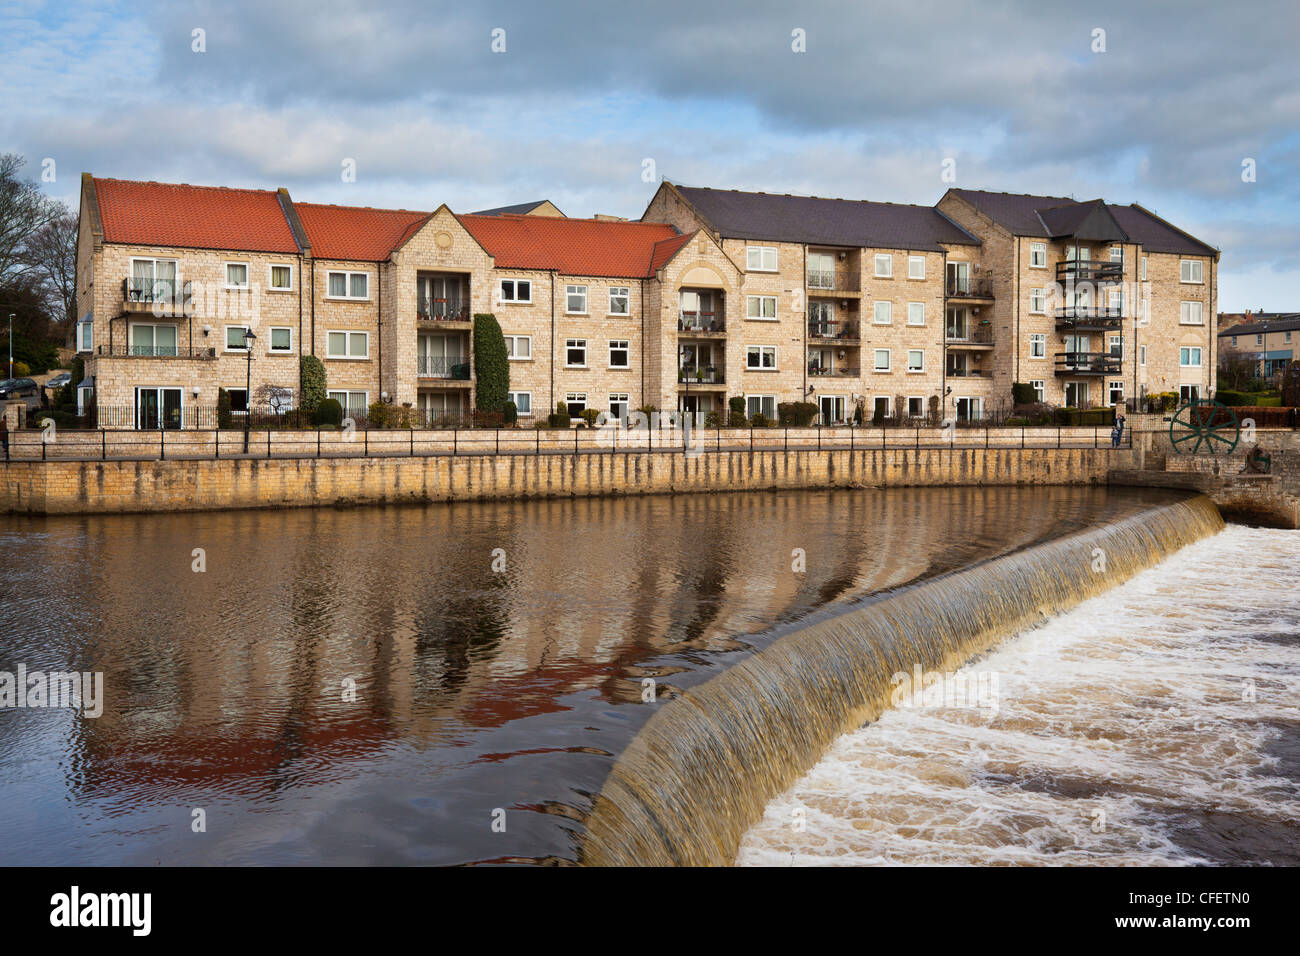 Modern apartment buildings beside The River Wharfe at Wetherby weir, Wetherby, West Yorkshire, UK Stock Photo